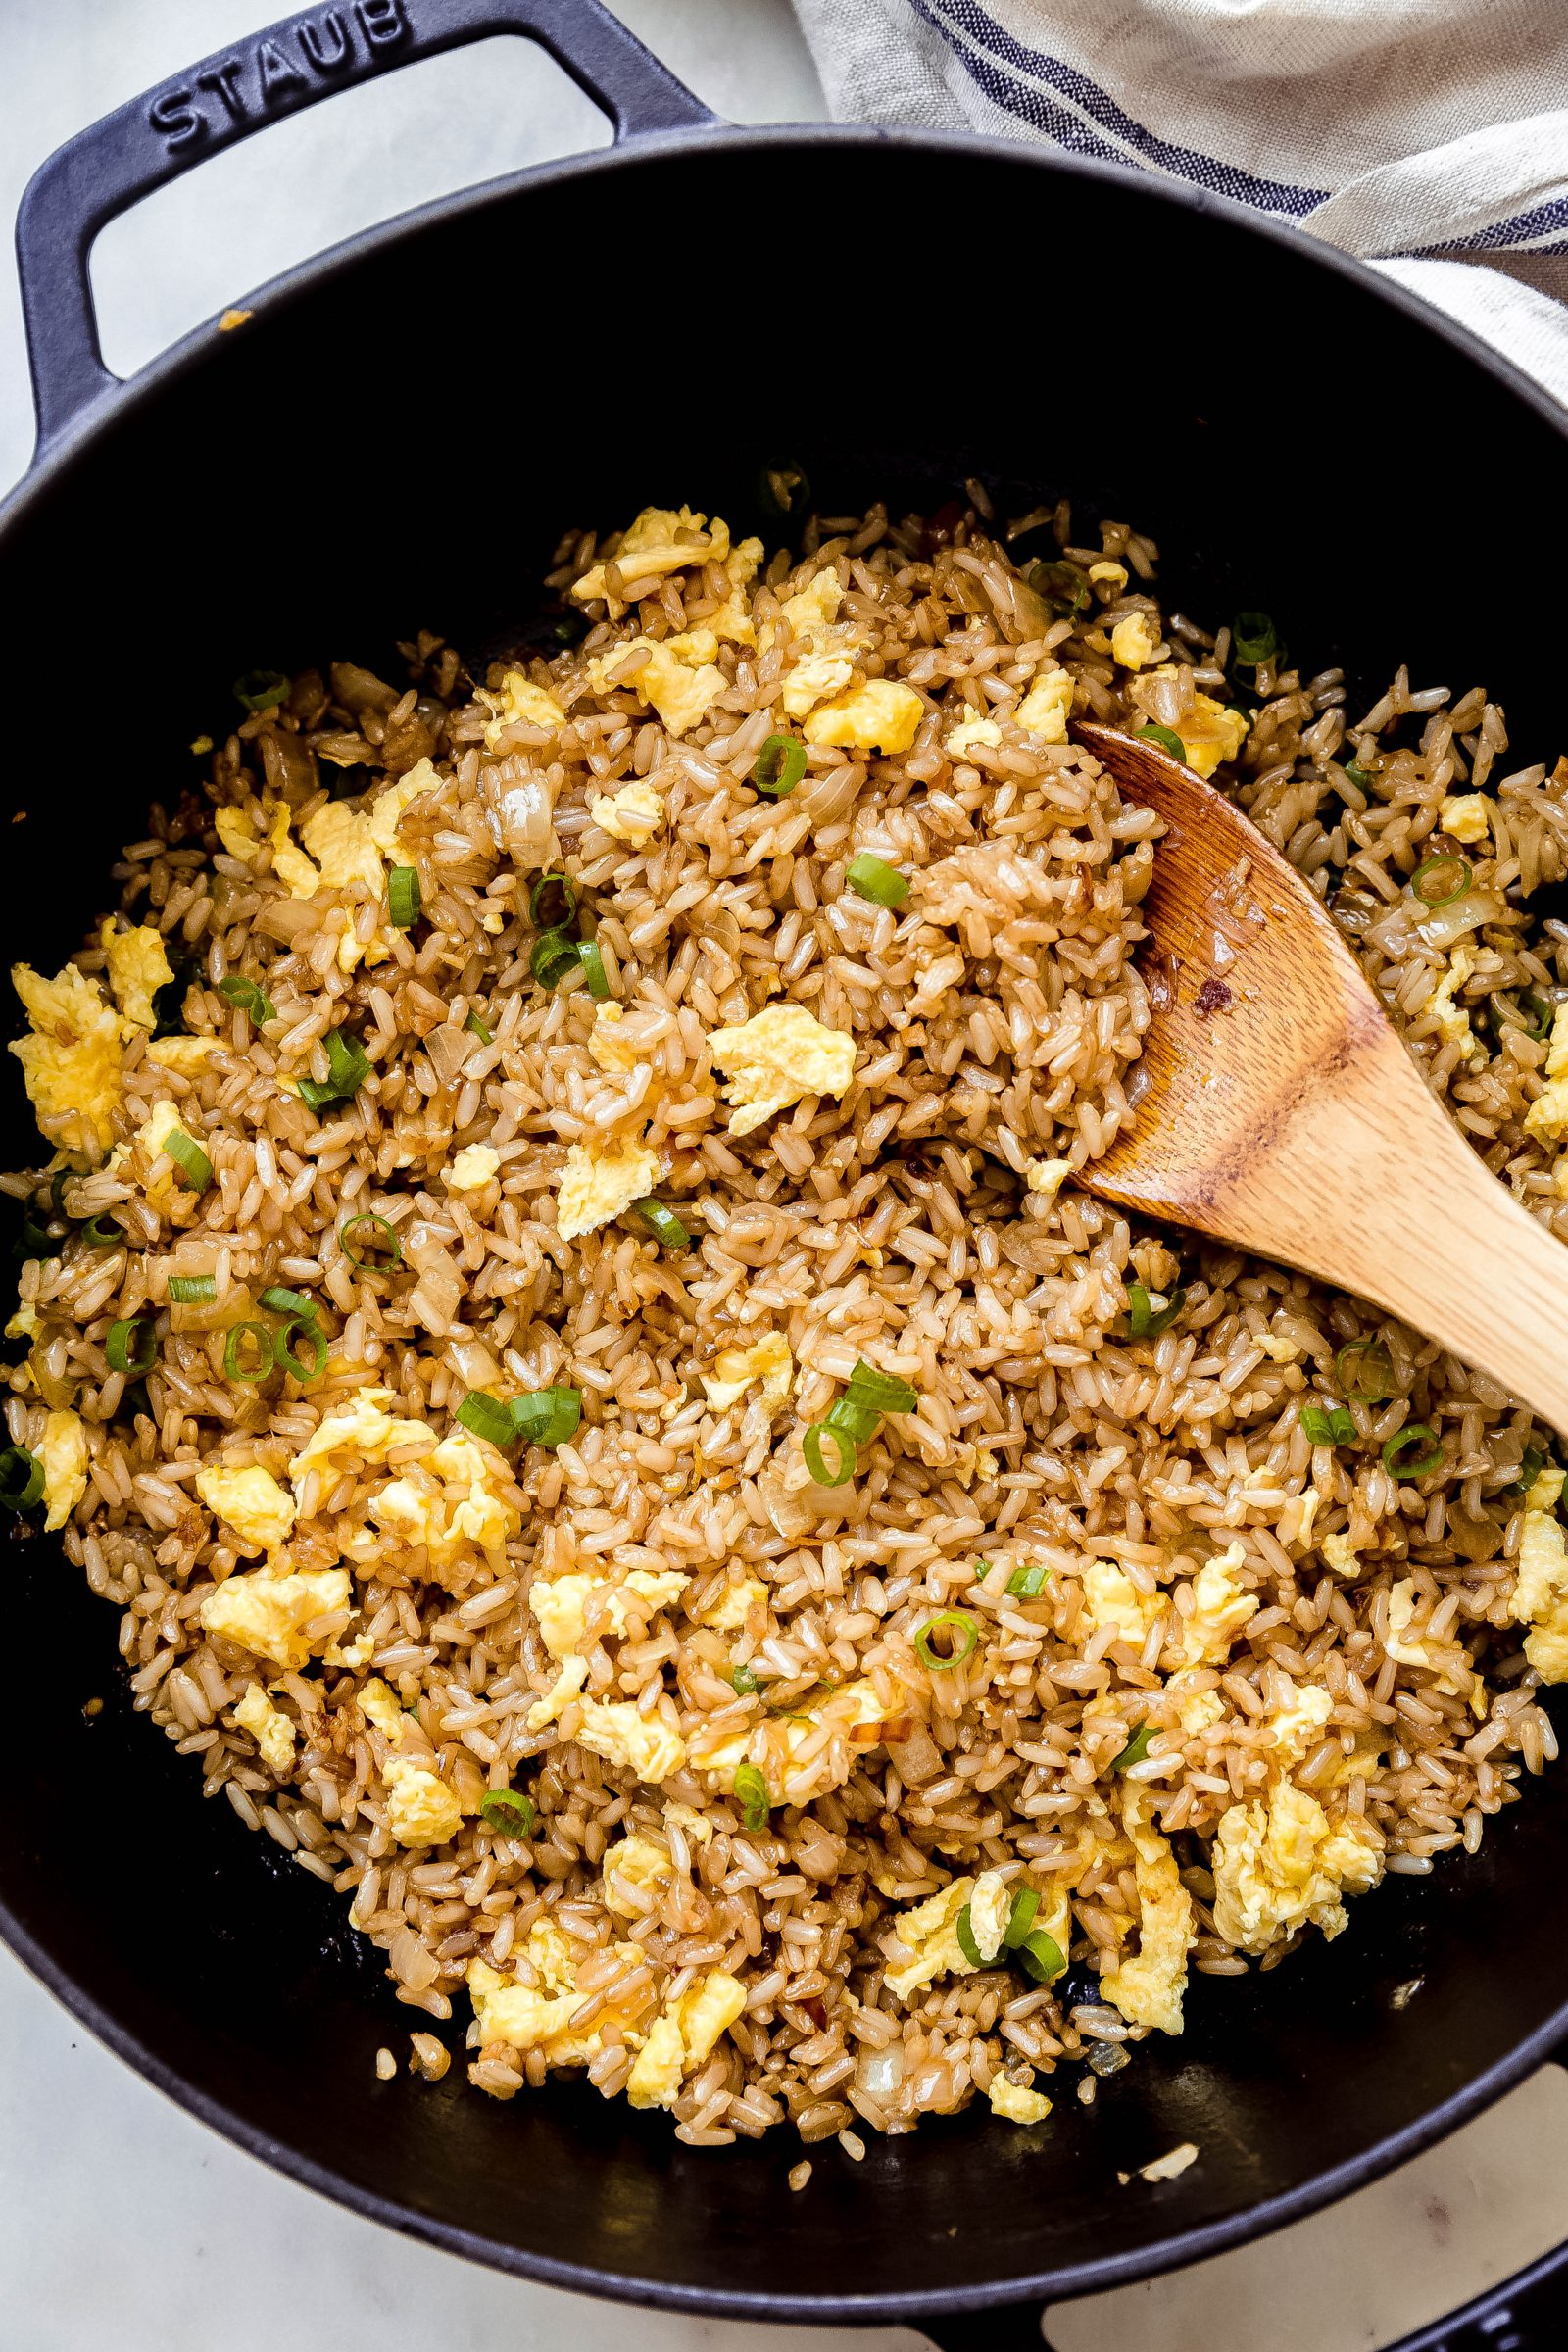 How To Make the Best Chicken Fried Rice Without a Wok